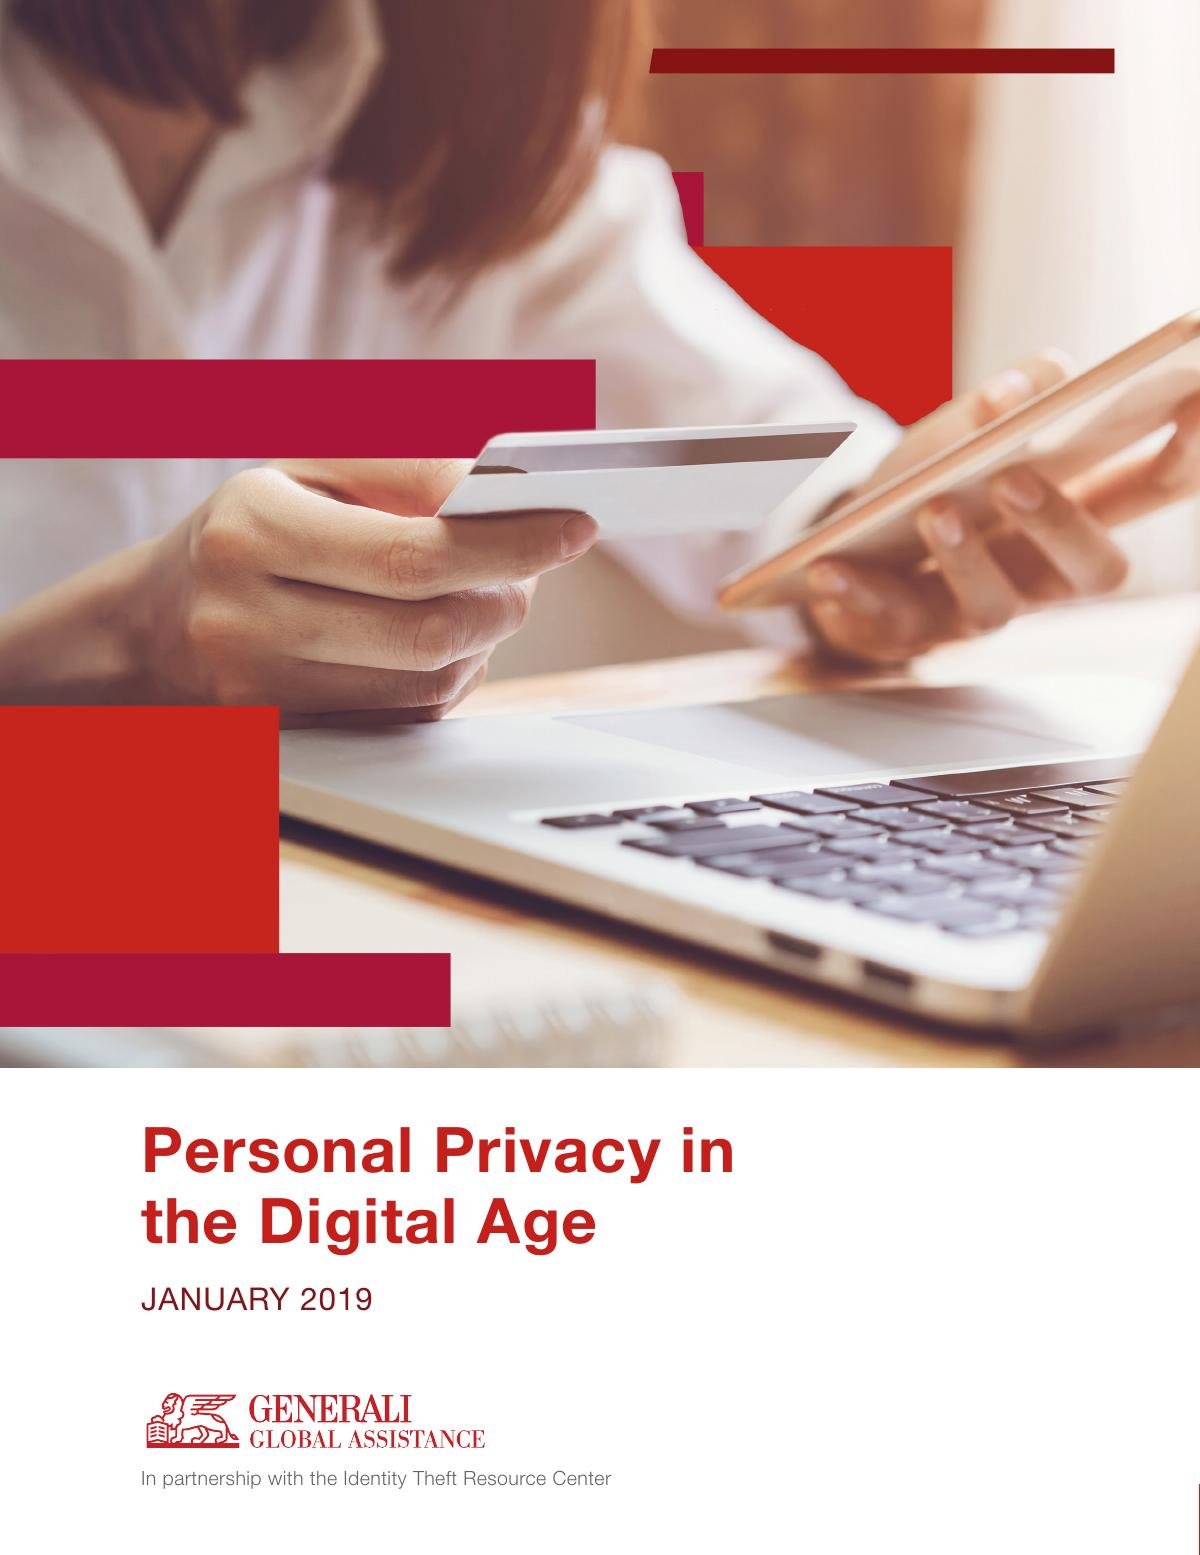 Personal Privacy in the Digital Age